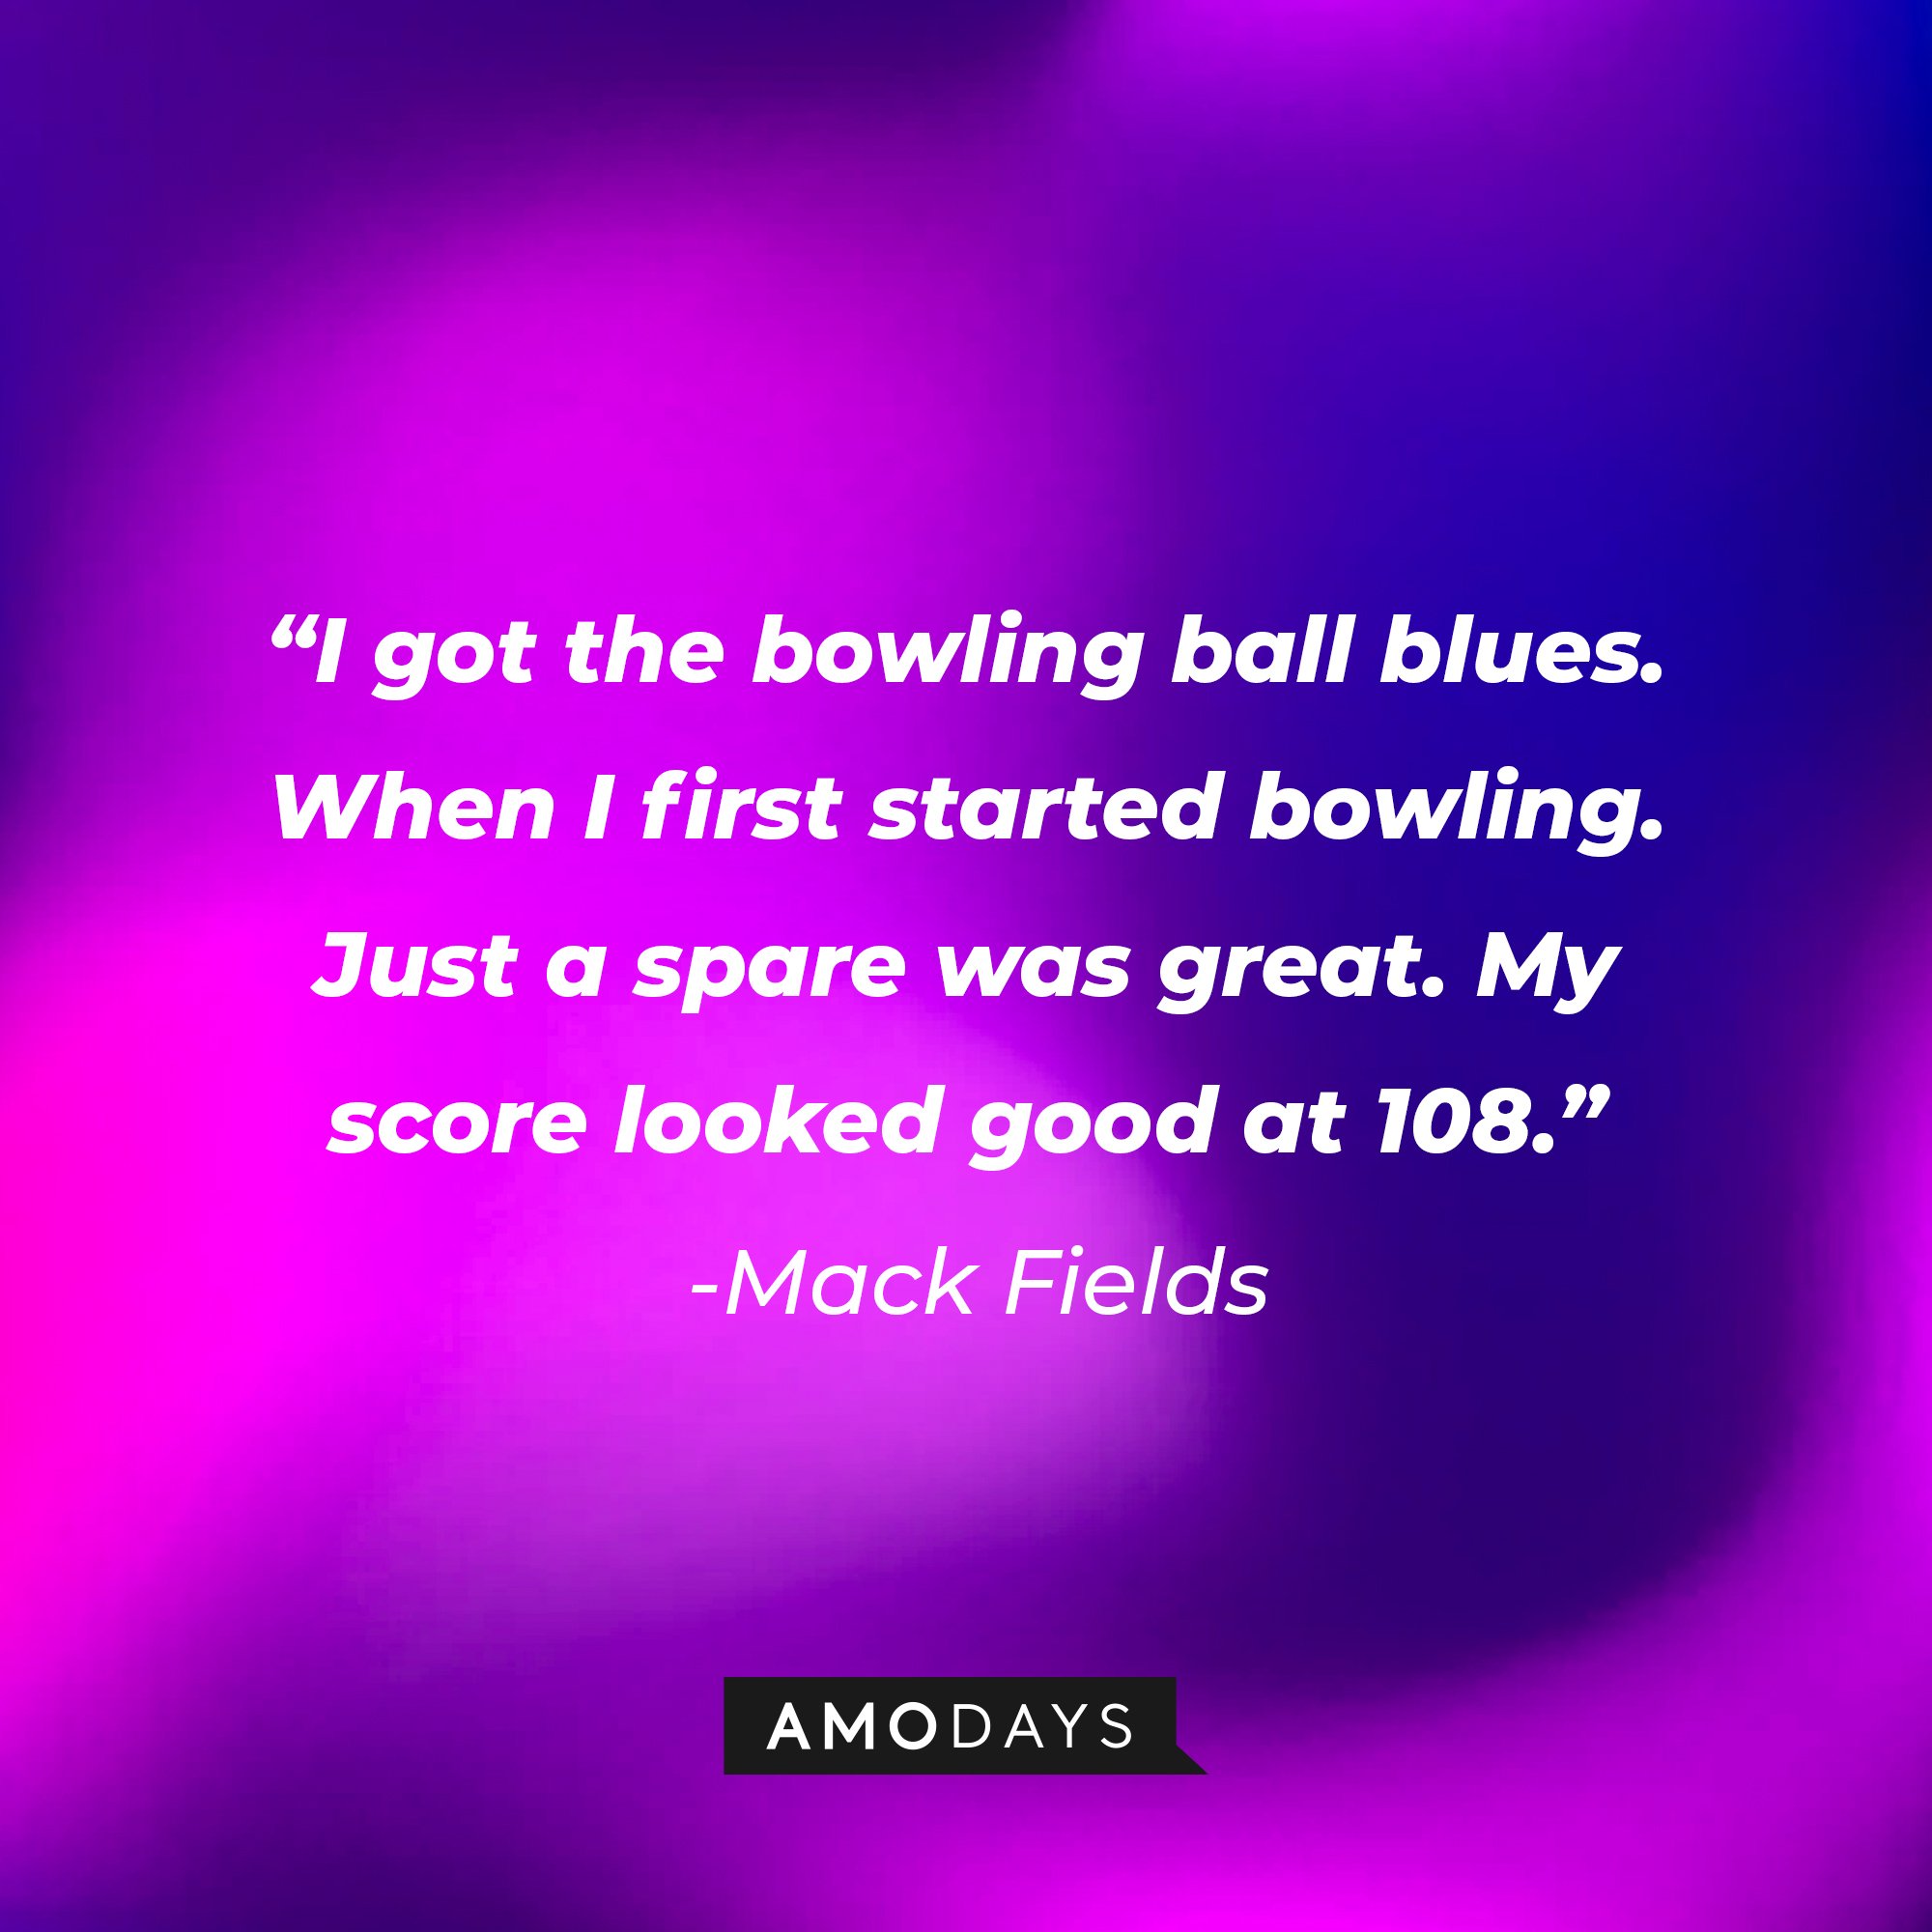 Mack Fields' quote: "I got the bowling ball blues. When I first started bowling. Just a spare was great. My score looked good at 108." | Image: AmoDays